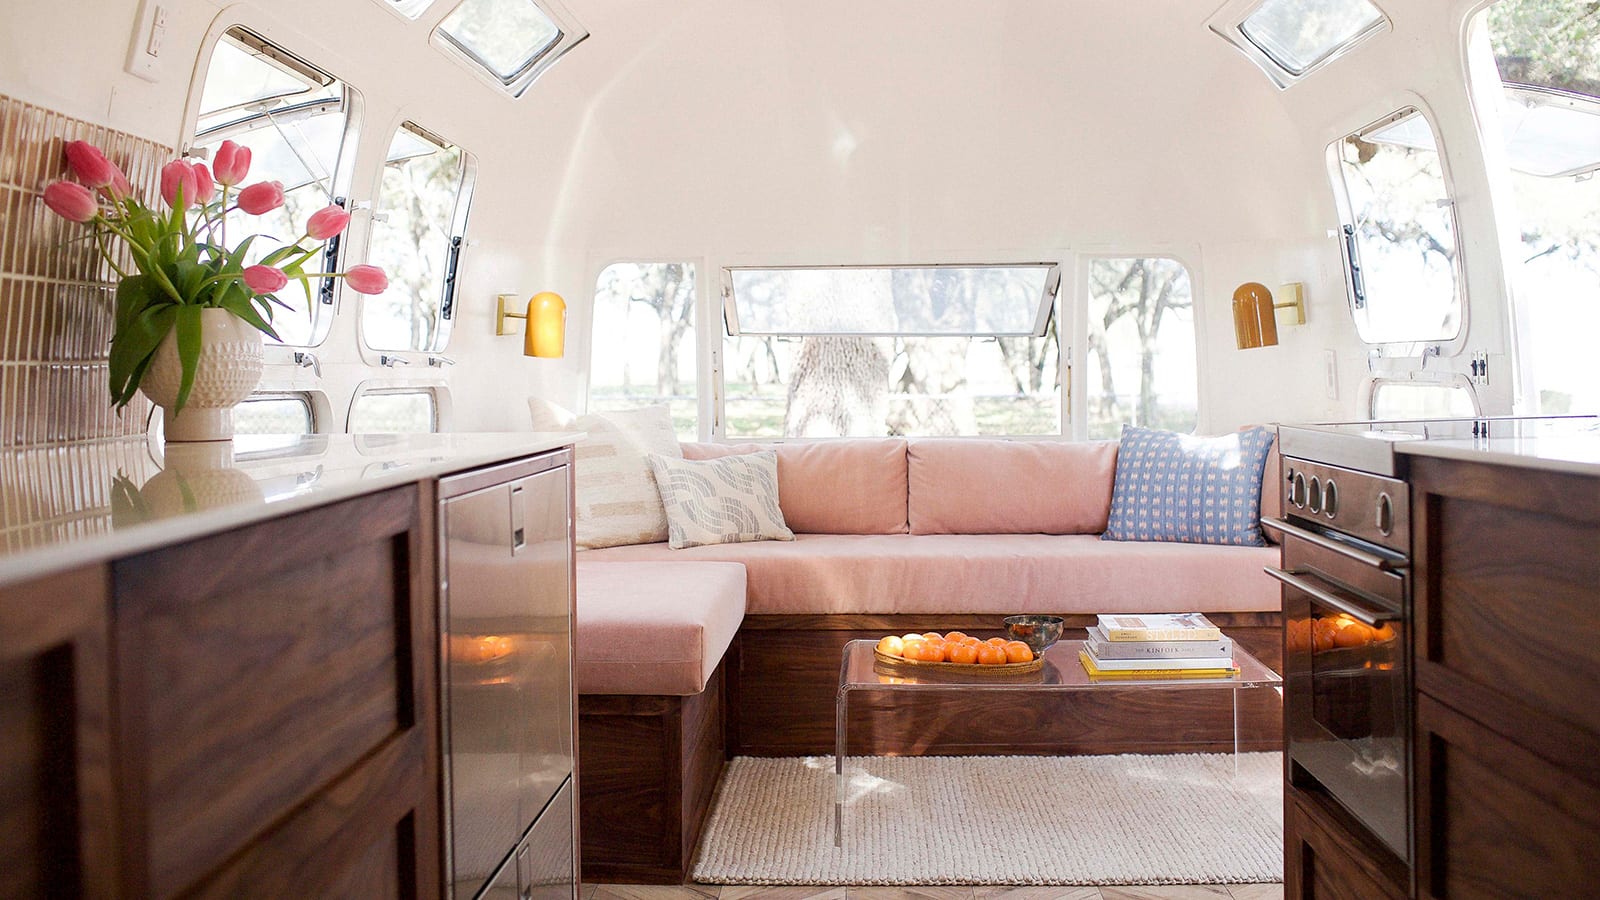 Life on the road .. An American turns a travel trailer into a stylish home